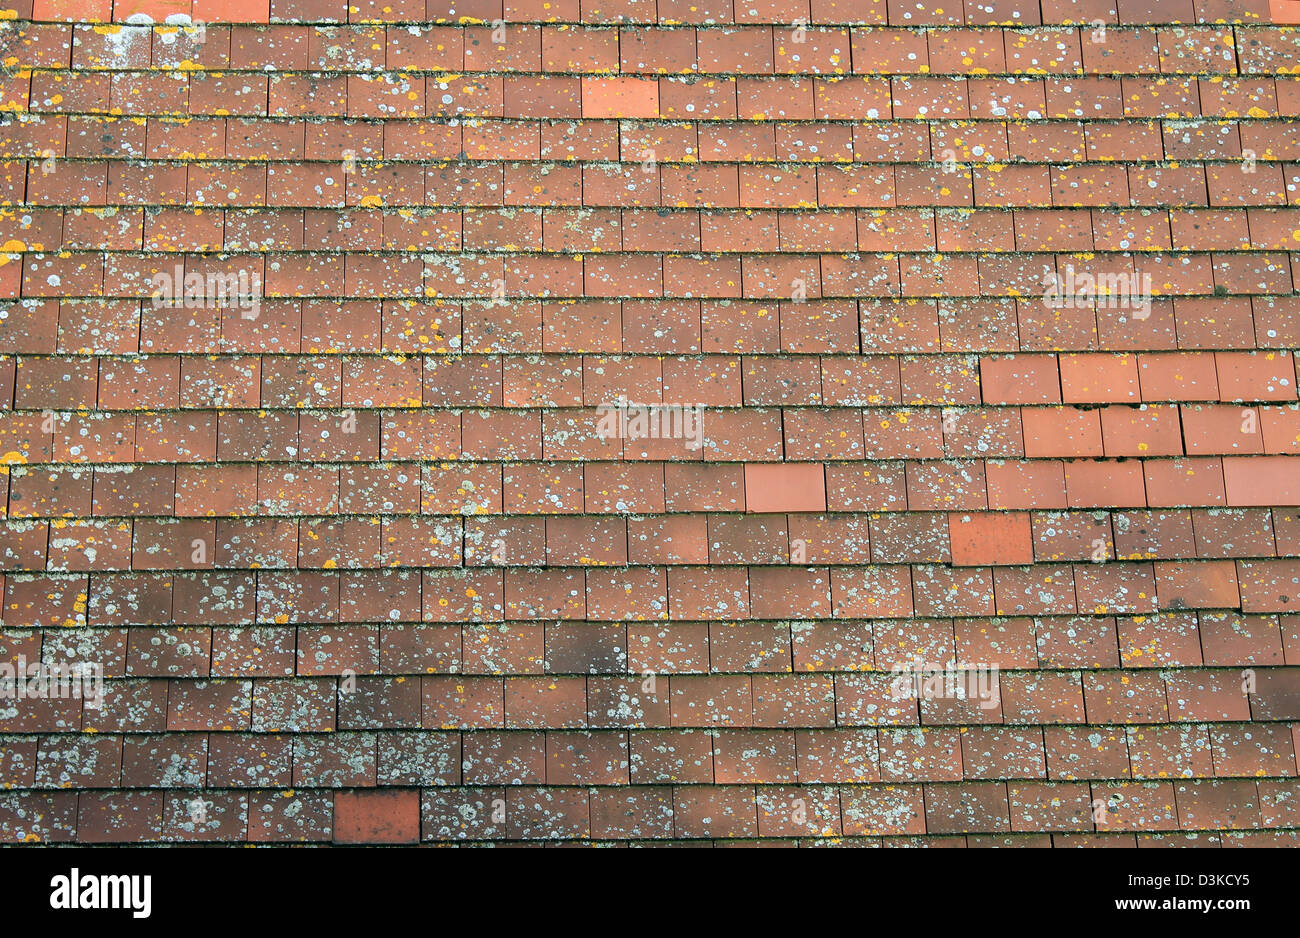 Abstract background of old red tiled roof on house. Stock Photo